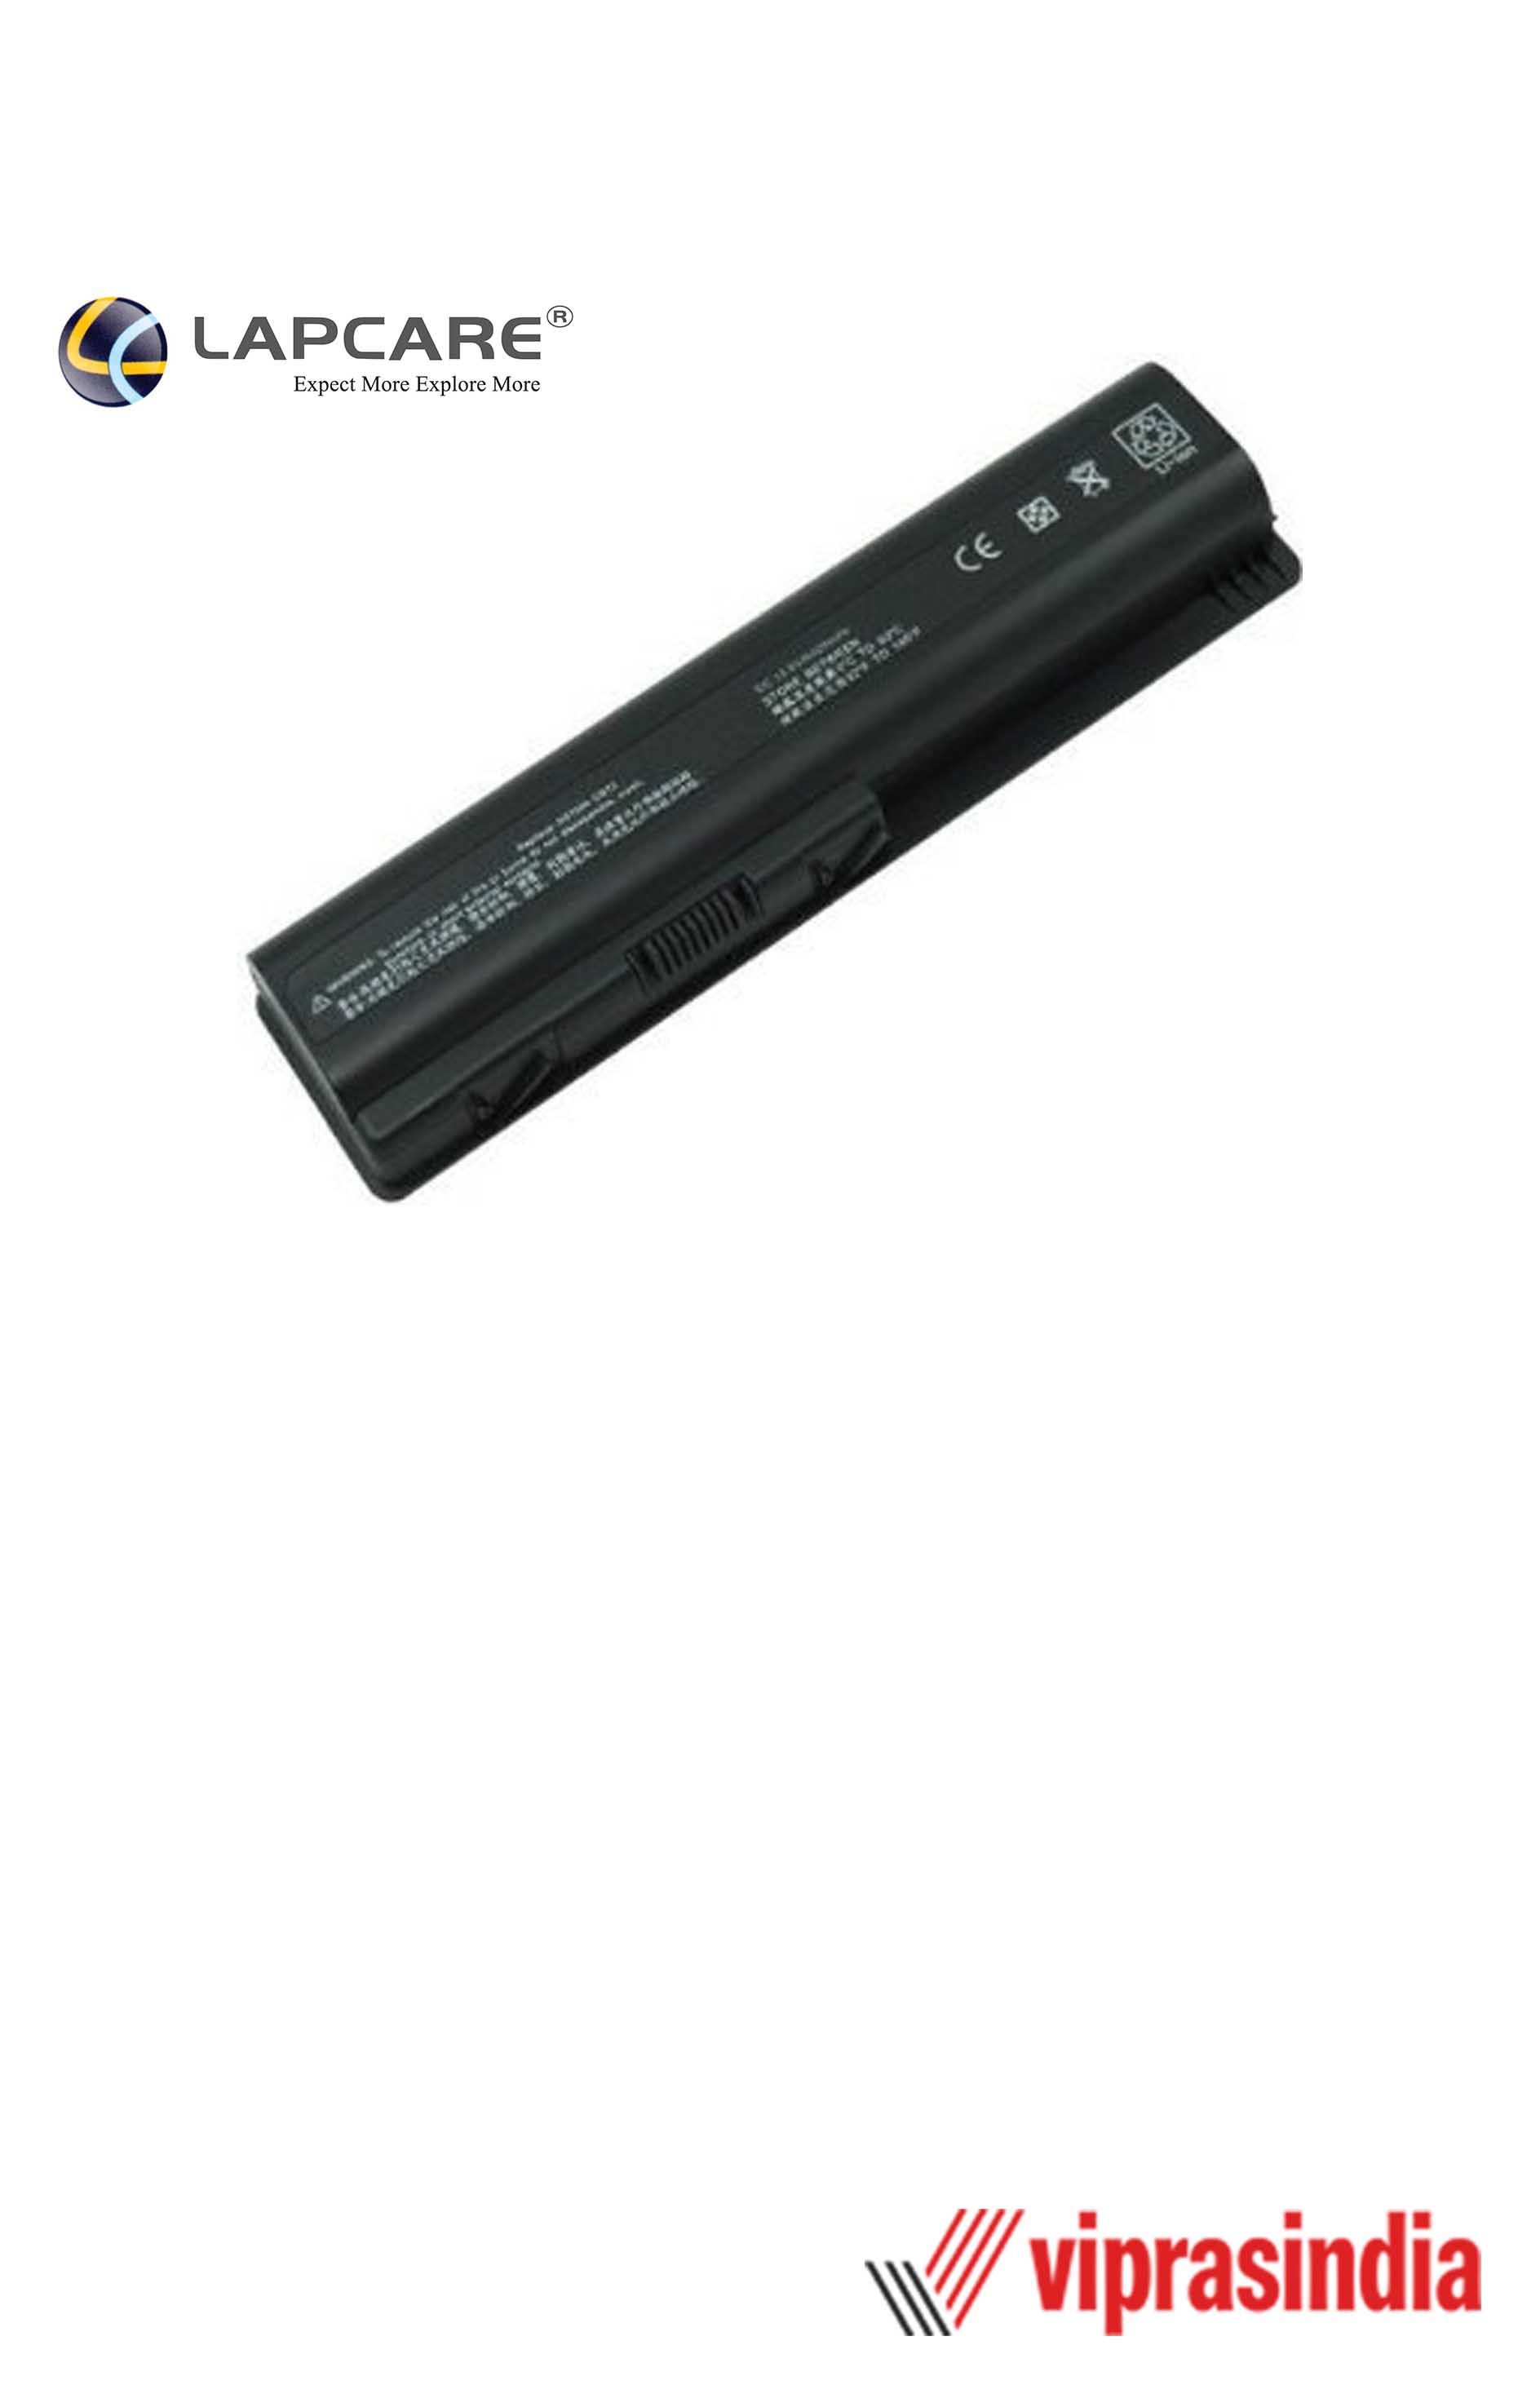 Laptop Battery Lapcare Compitable For HP M006